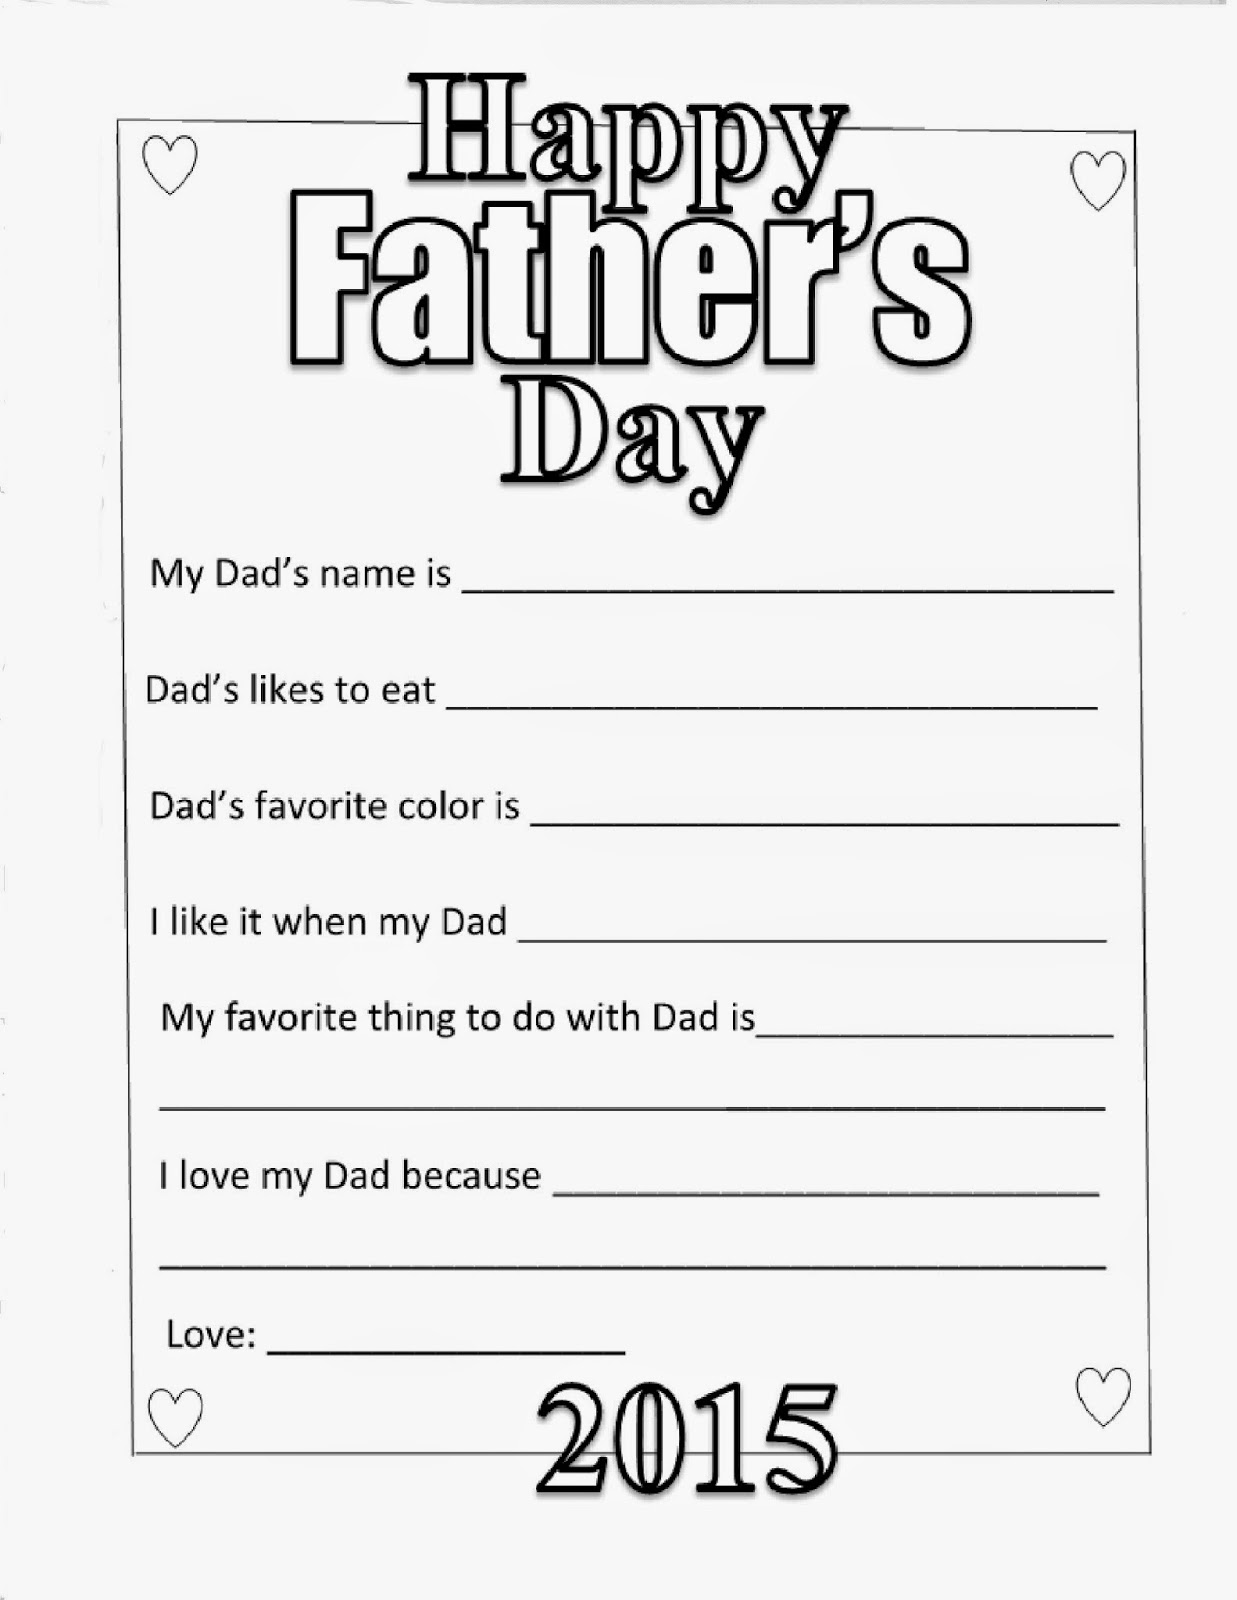 father-s-day-coloring-cards-10-pack-sarah-renae-clark-coloring